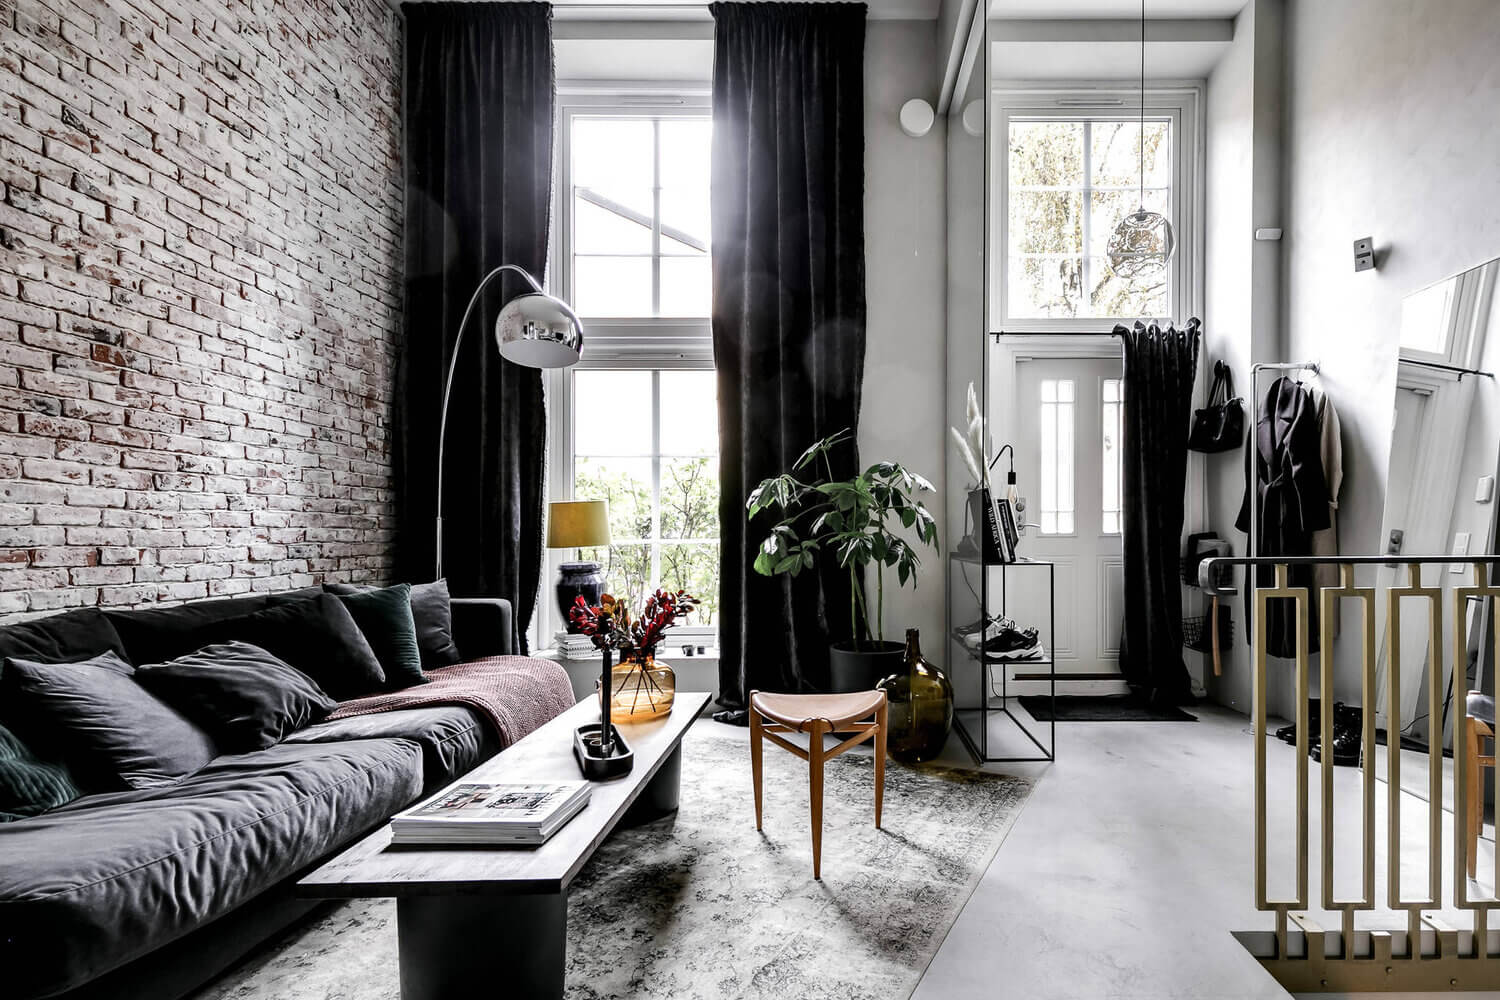 AnIndustrialScandinavianApartmentwithExposedBrickWall TheNordroom1 An Industrial Scandinavian Apartment with Exposed Brick Wall